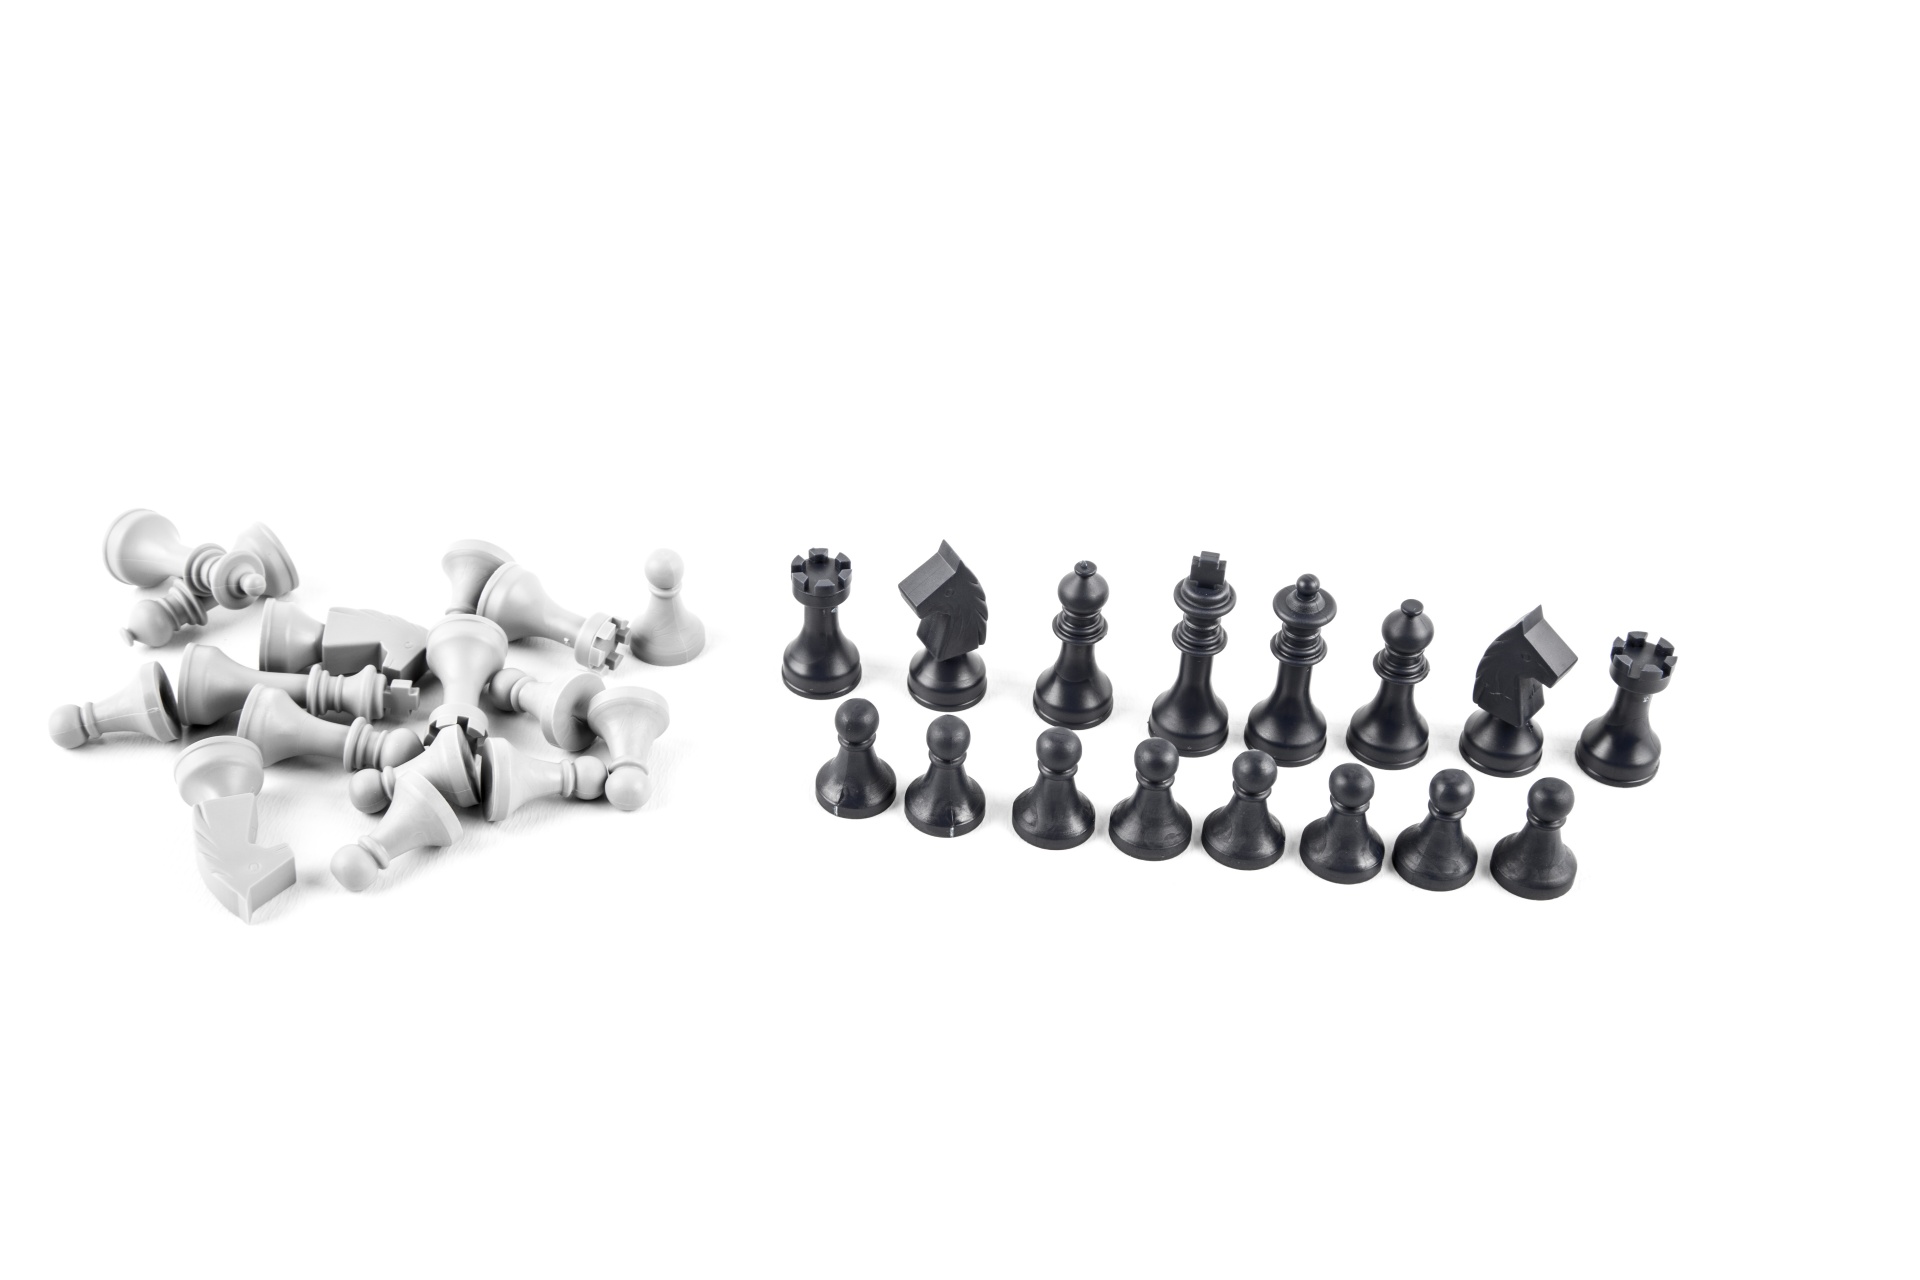 edit-free-photo-of-chess-tower-chessboard-board-game-chess-pieces